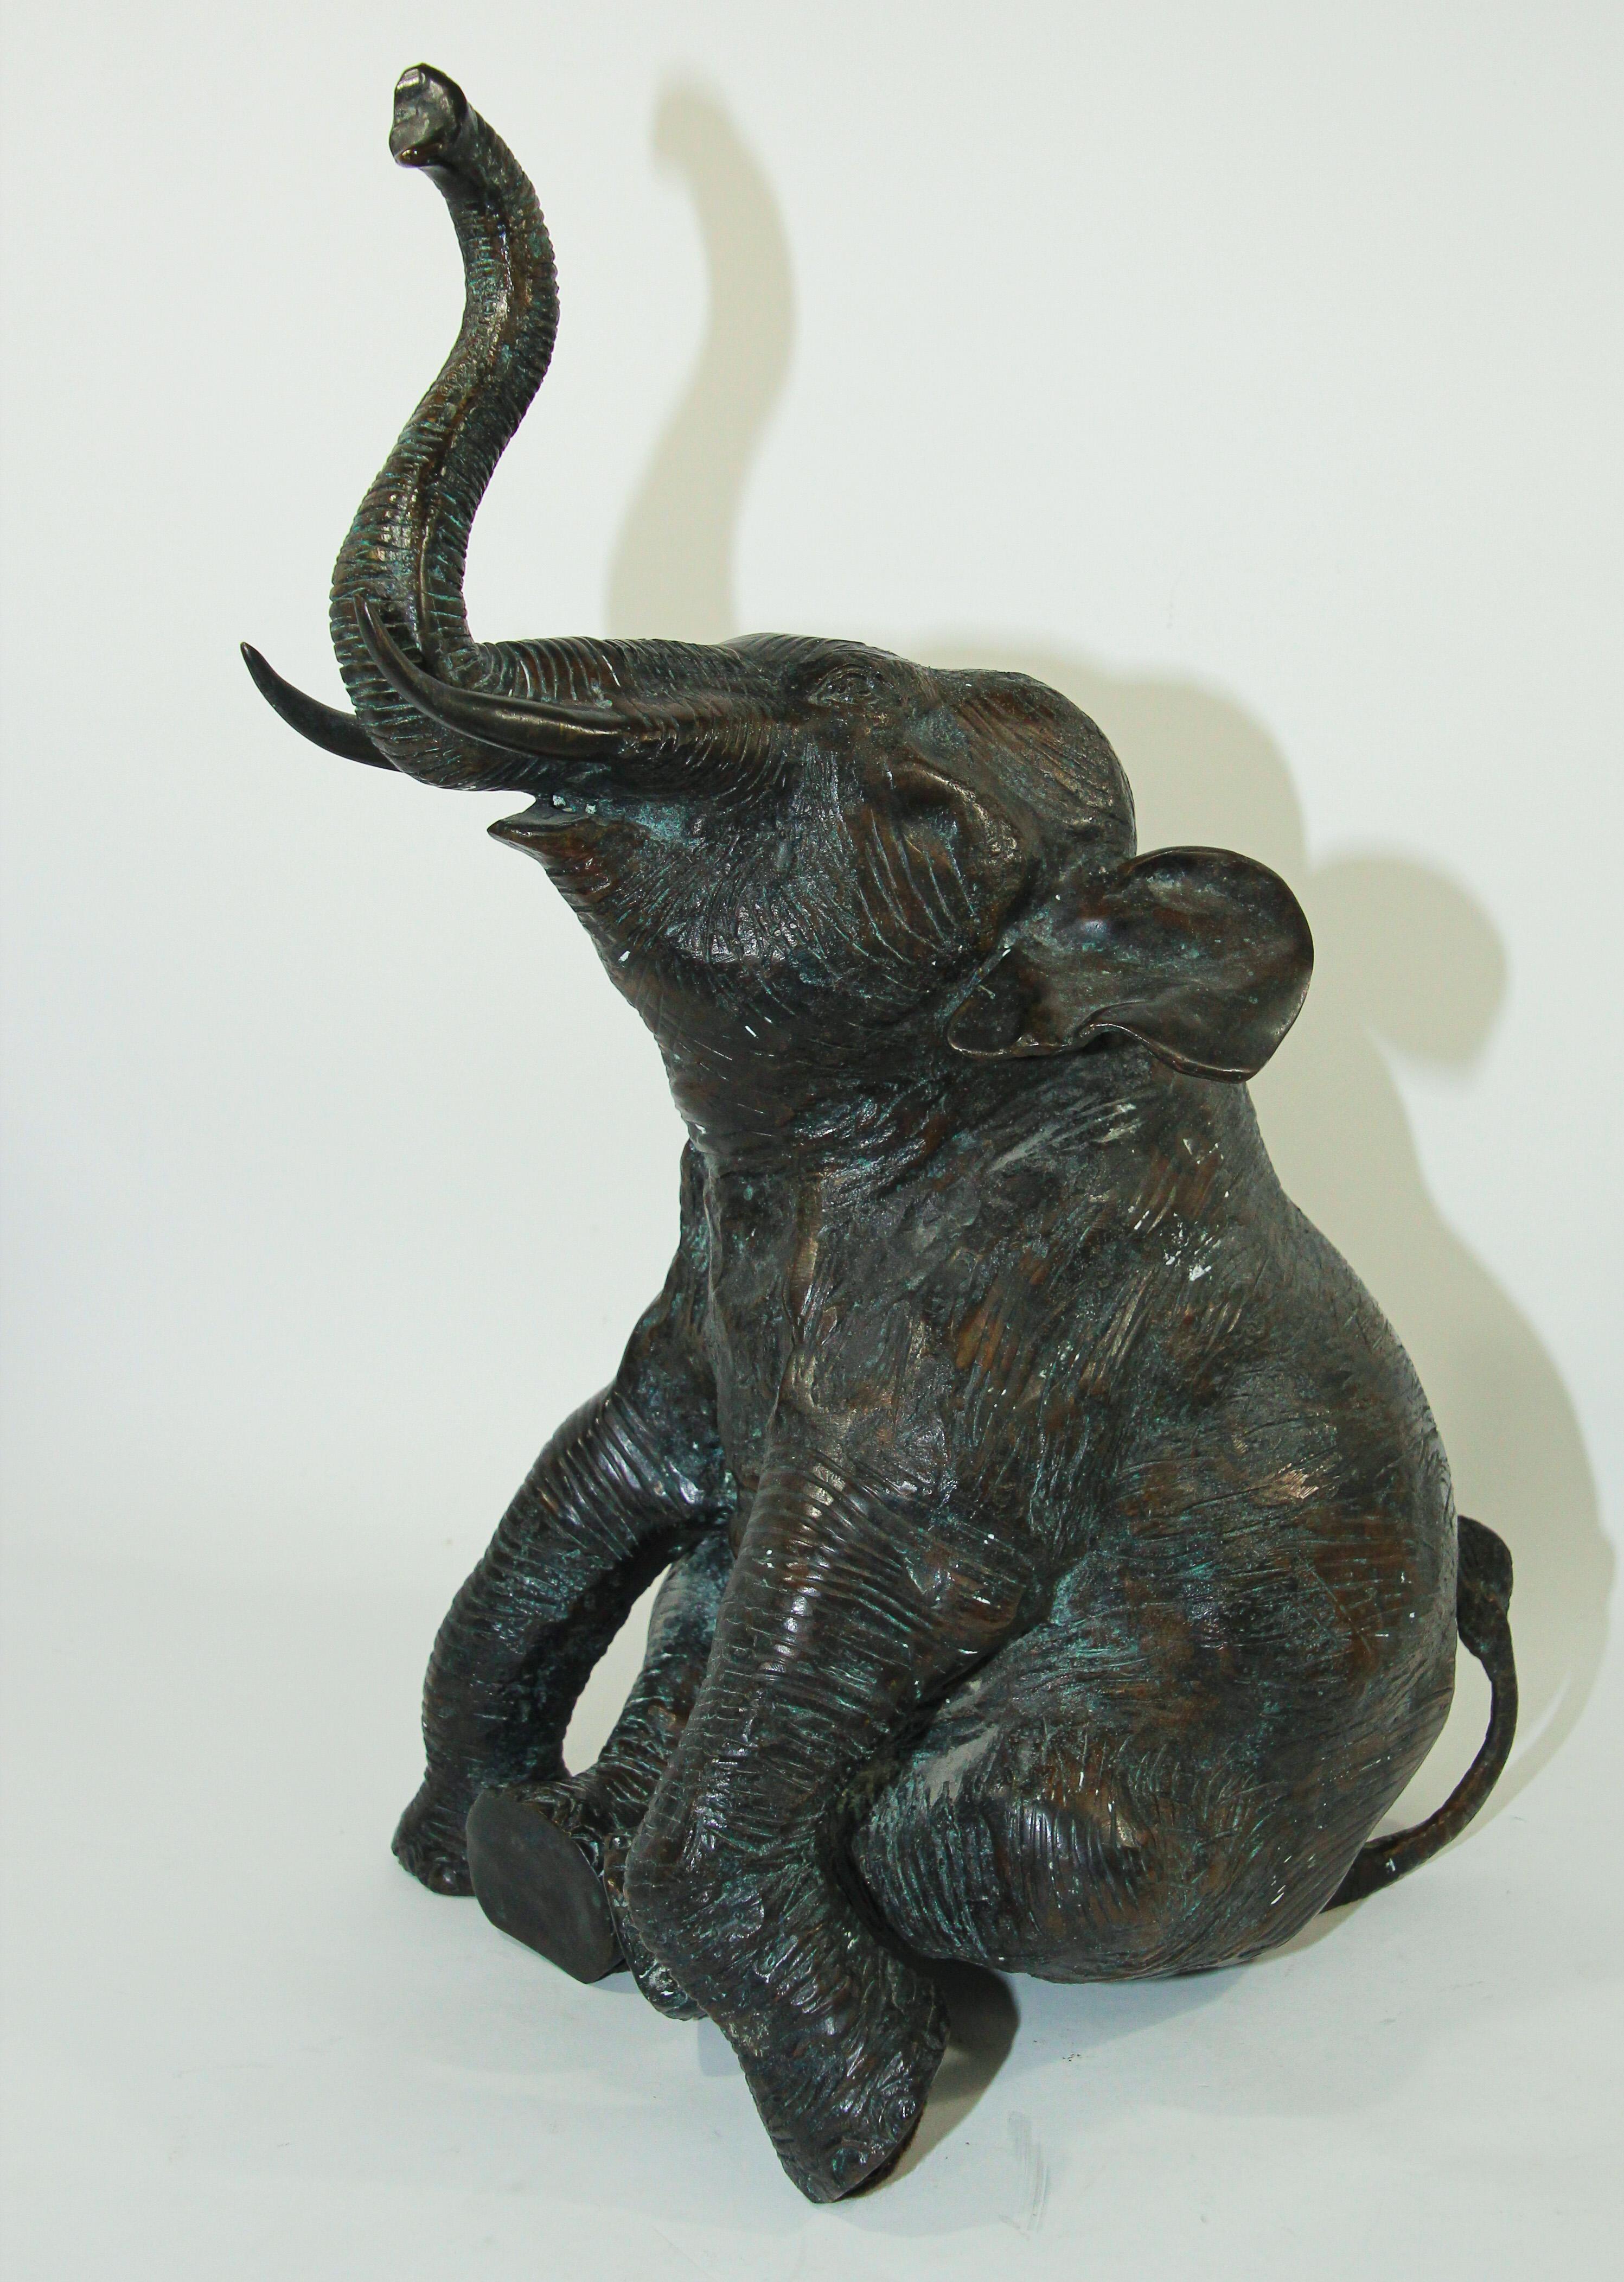 Large Asian style metal bronze sitting elephant with raised trunk
Bronze elephant figurine statue cast metal sculpture Art.
Verdigris finished cast brass Elephant
Elephants bring good luck and good health with trunk up, 
Dimensions : 9.5